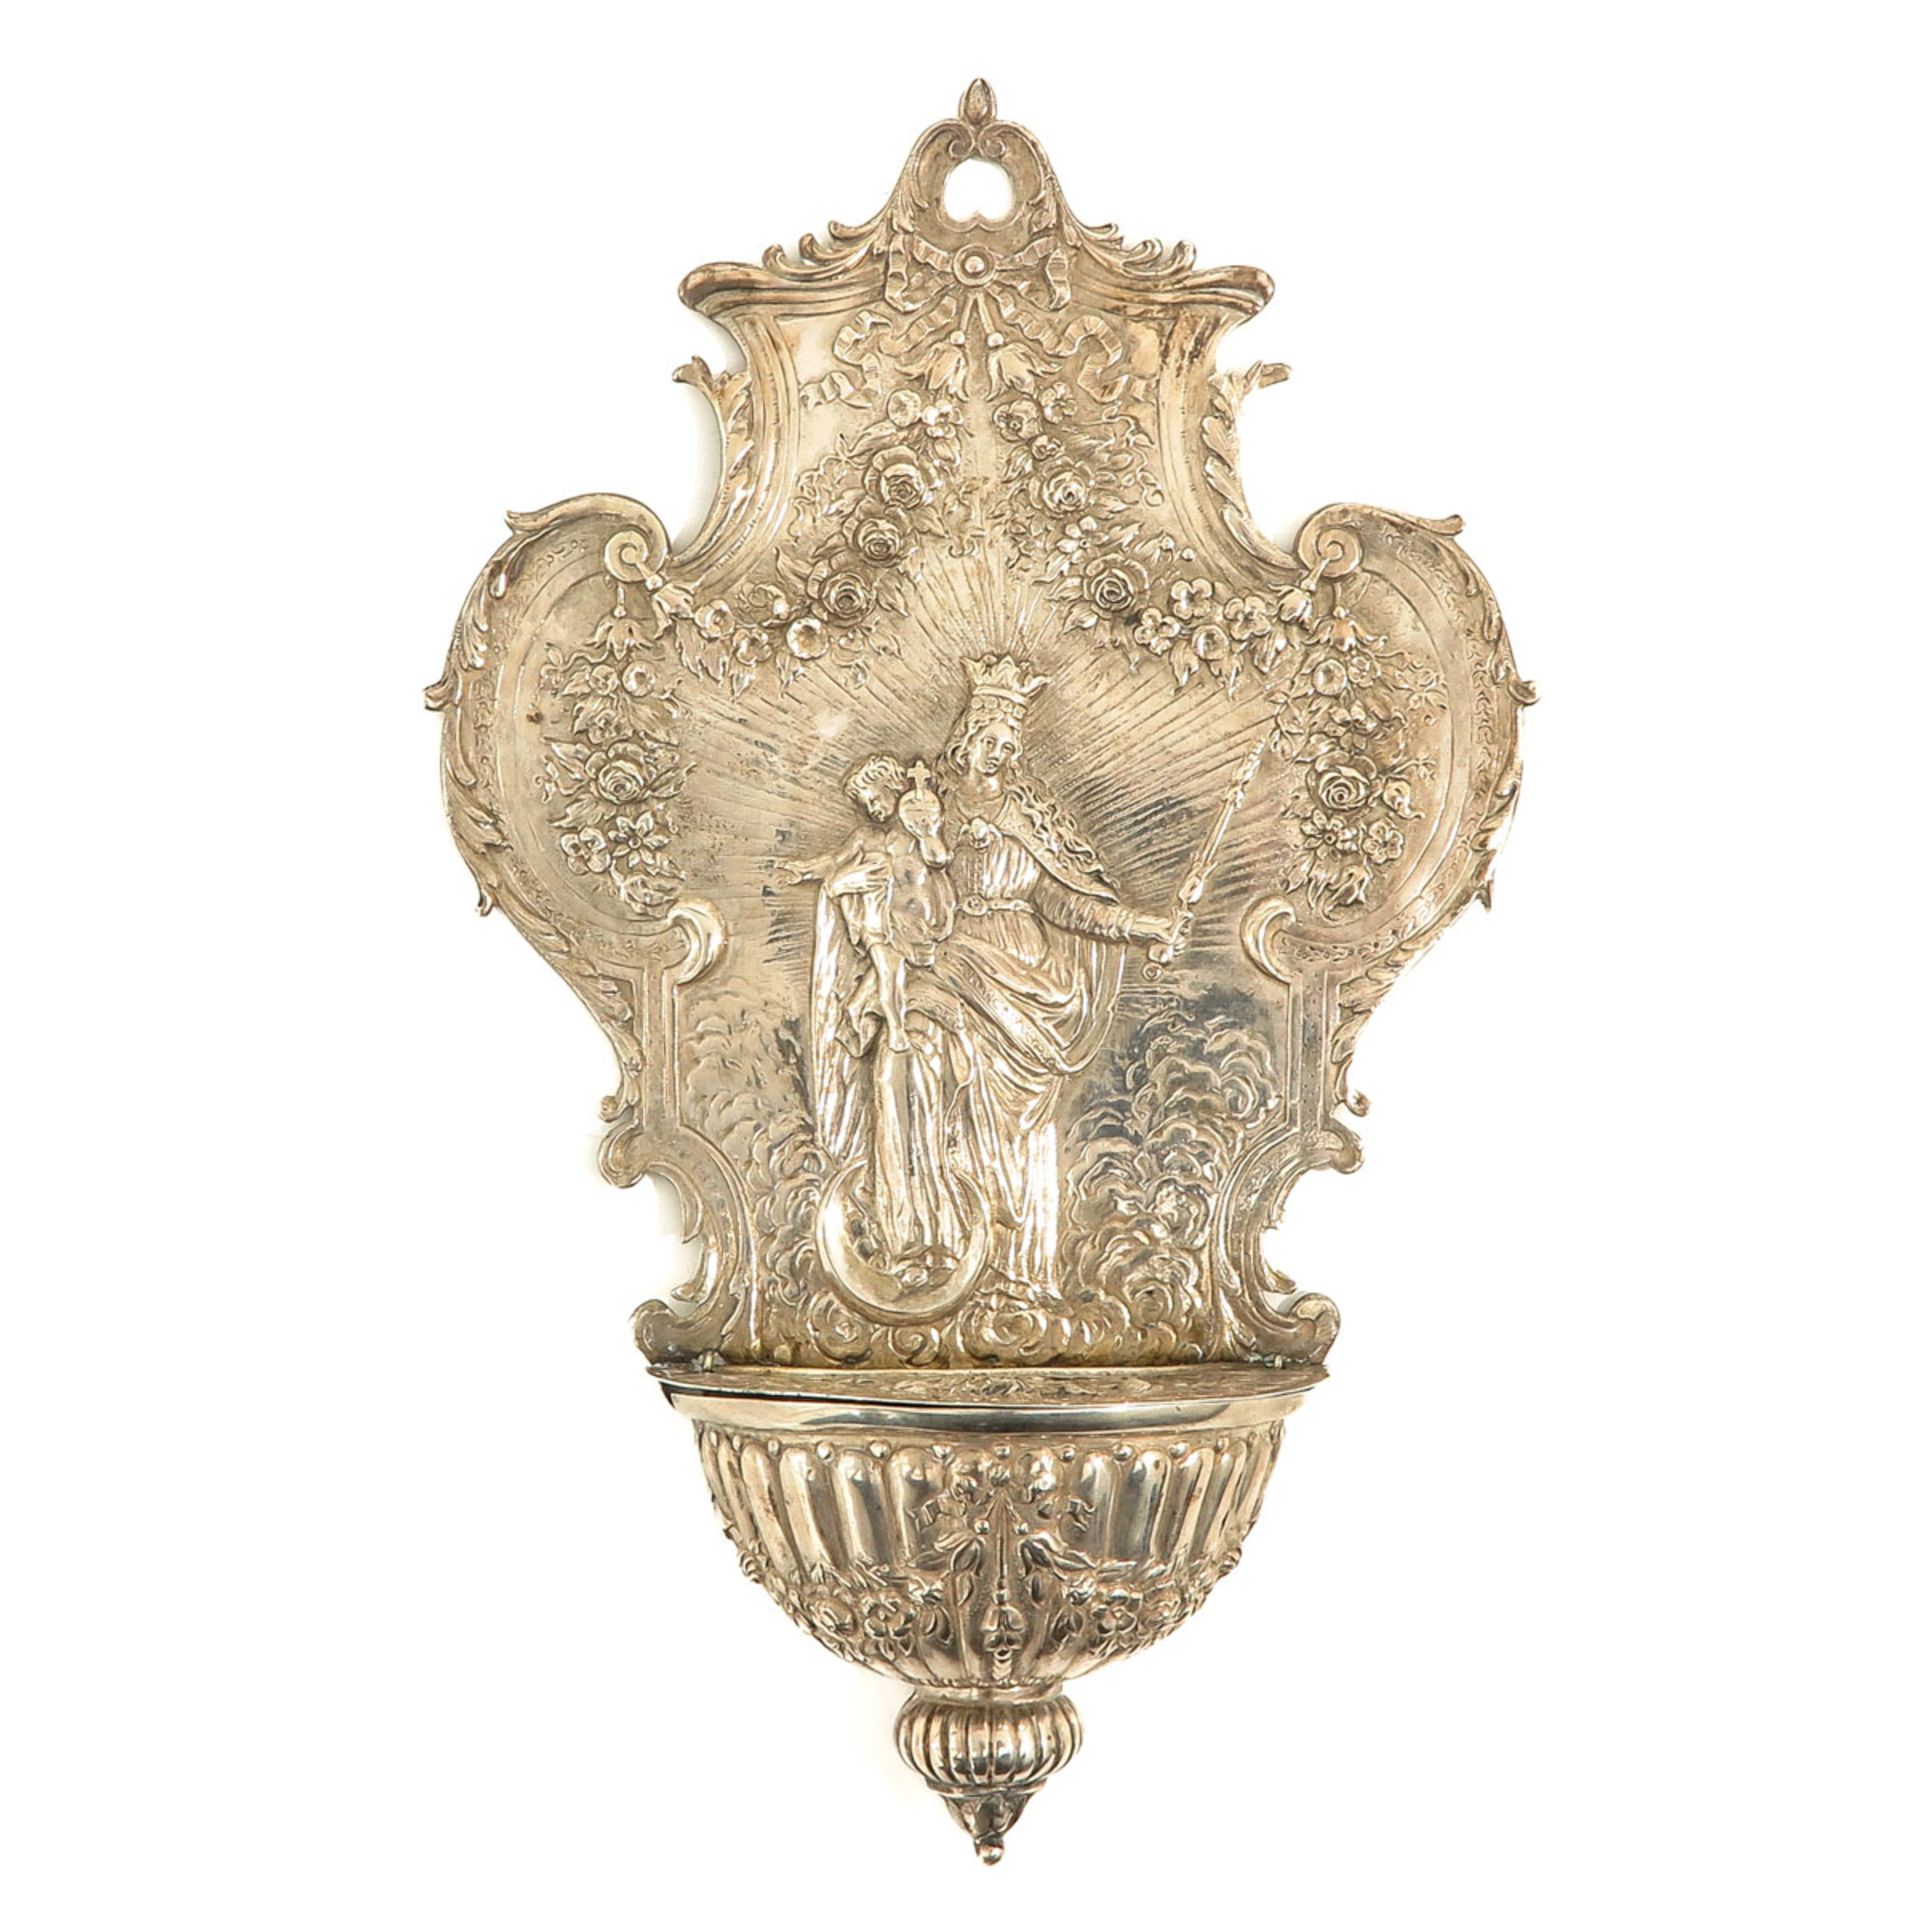 A Silver Holy Water Font